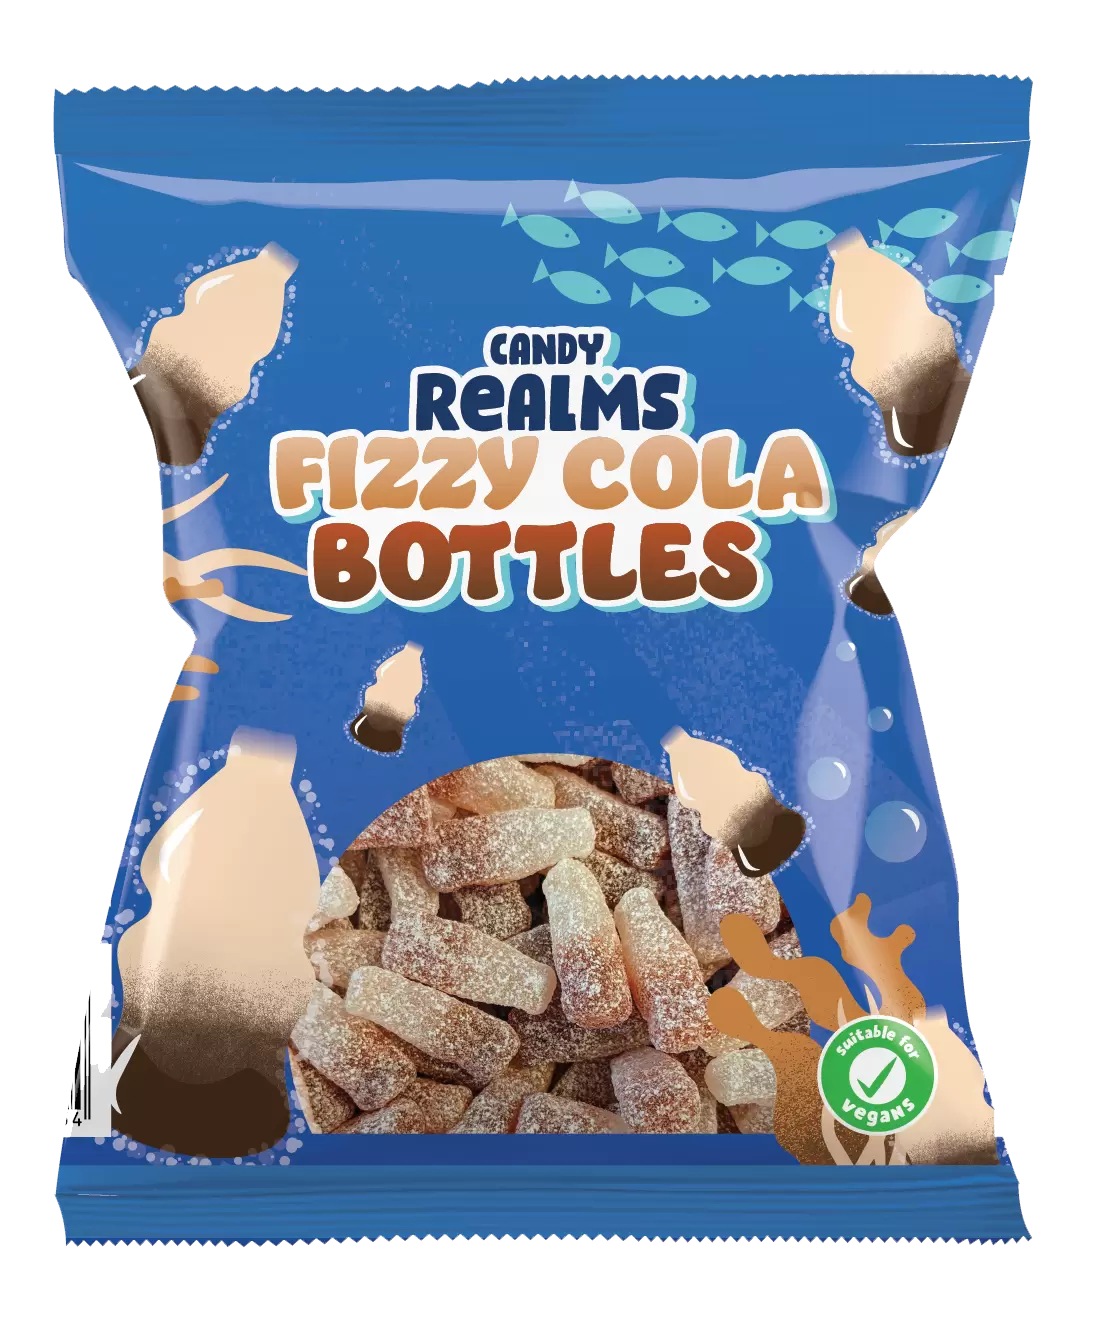 Candy Realms Fizzy Cola Bottles - 190g